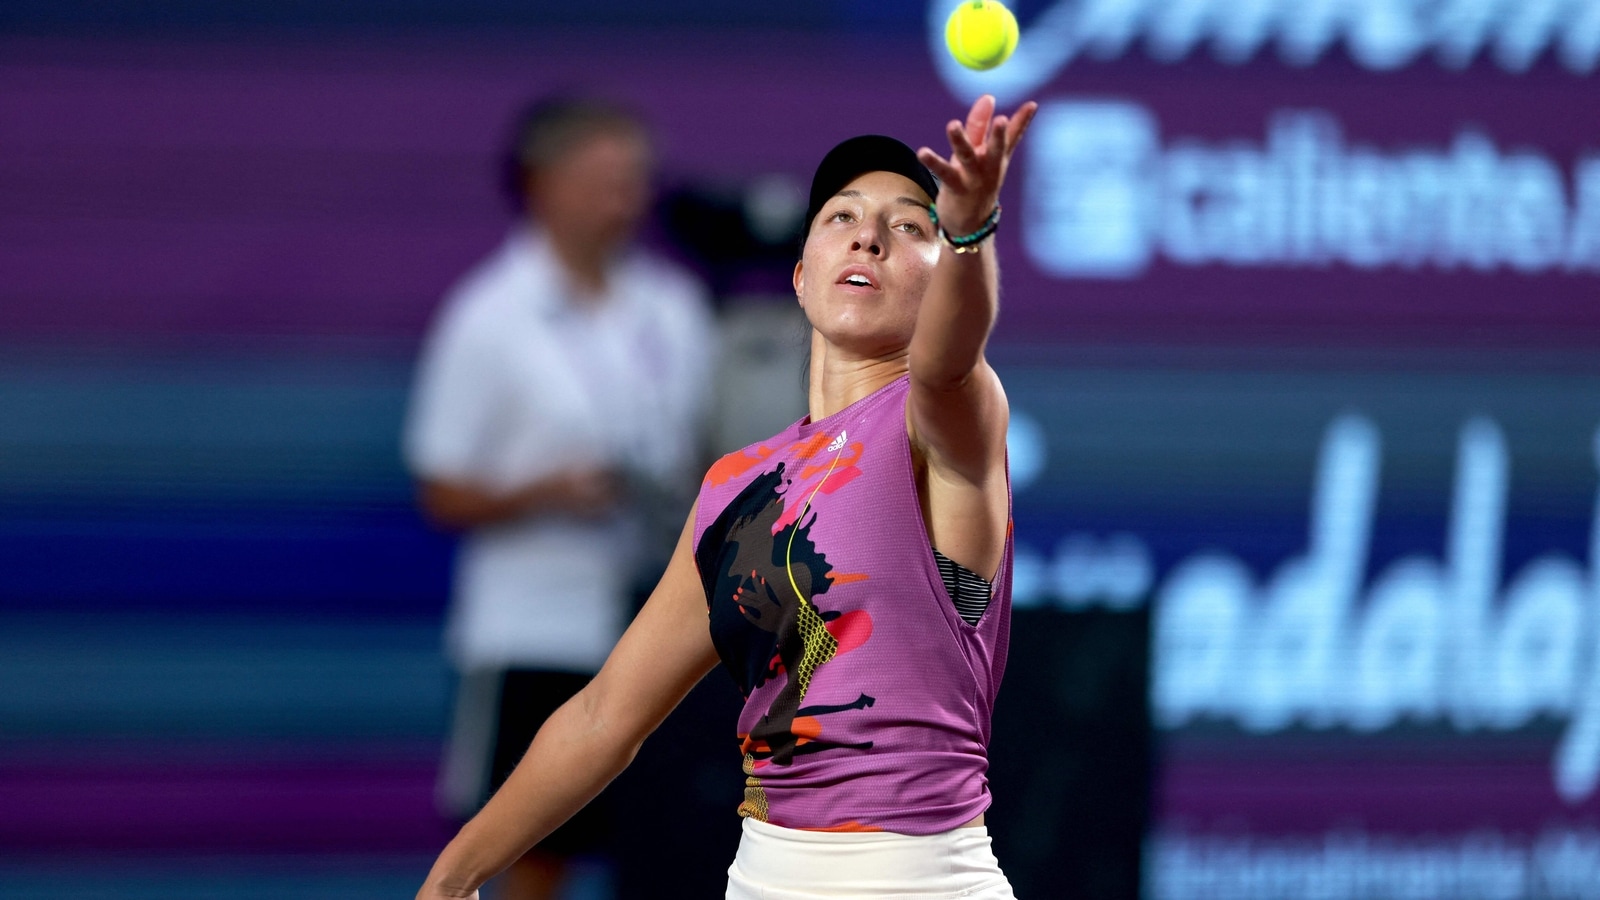 WTA Finals Live Streaming When and Where to watch WTA finals match